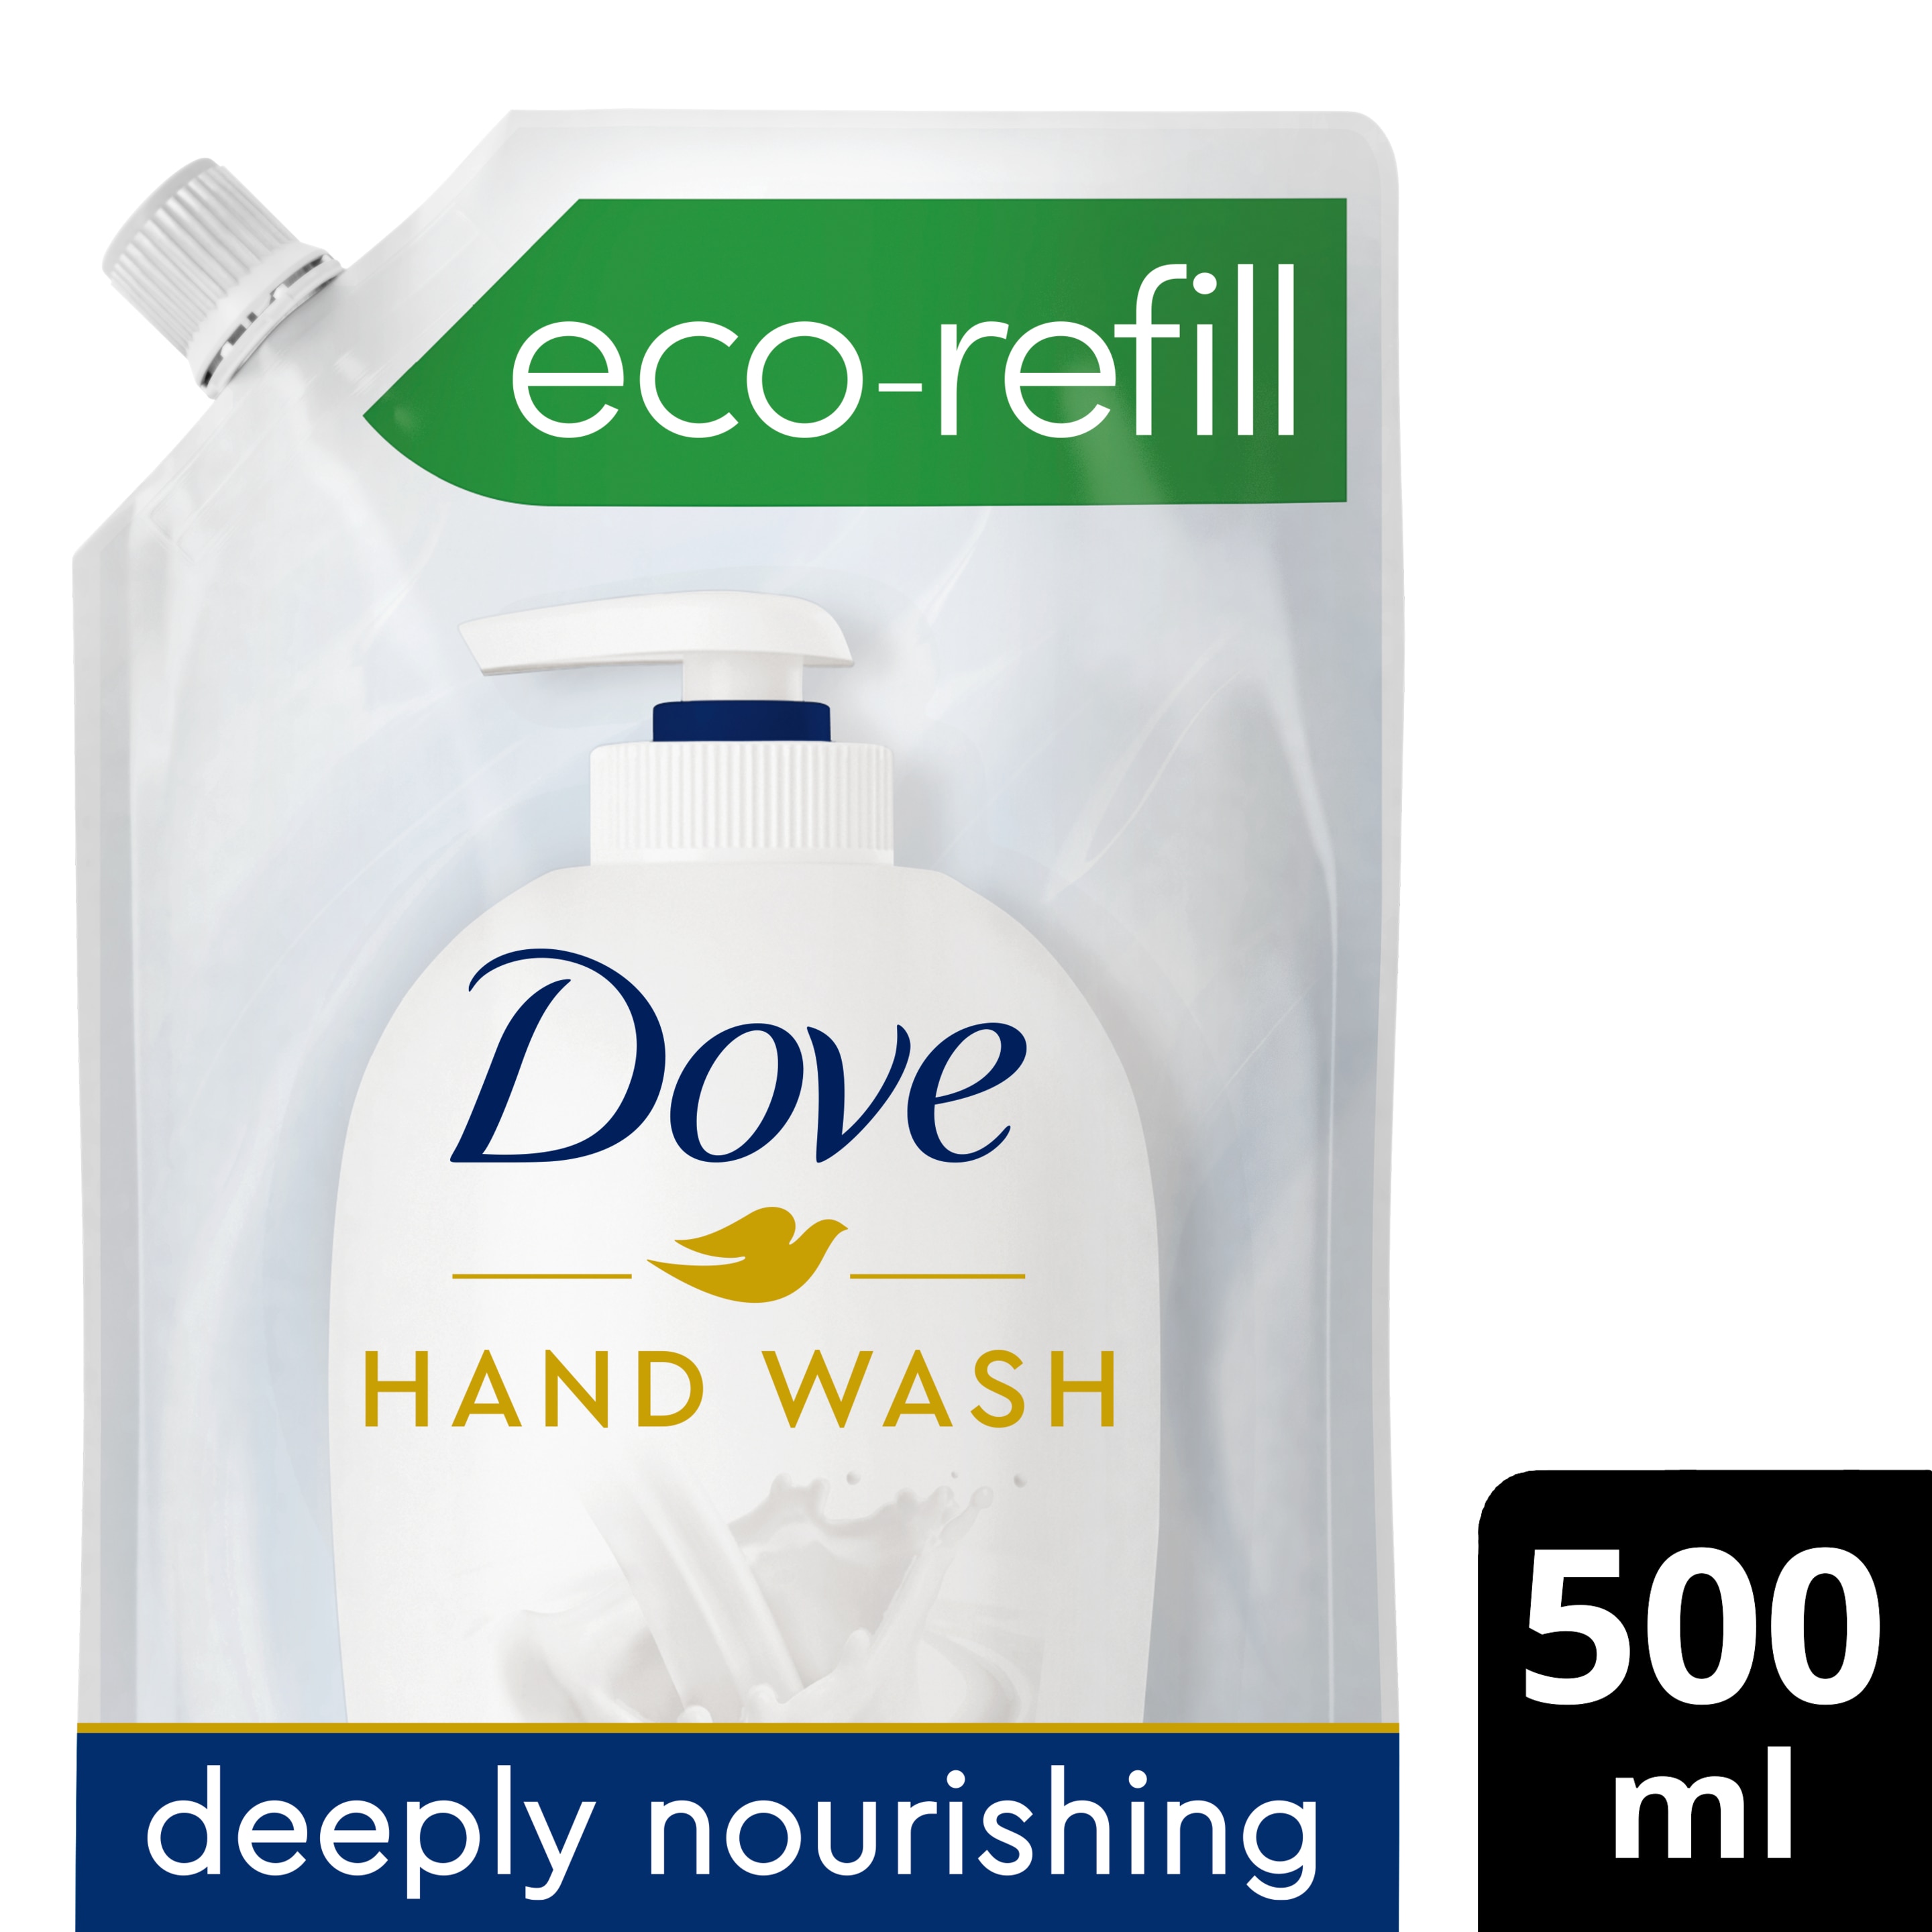 Caring Hand Wash Refill